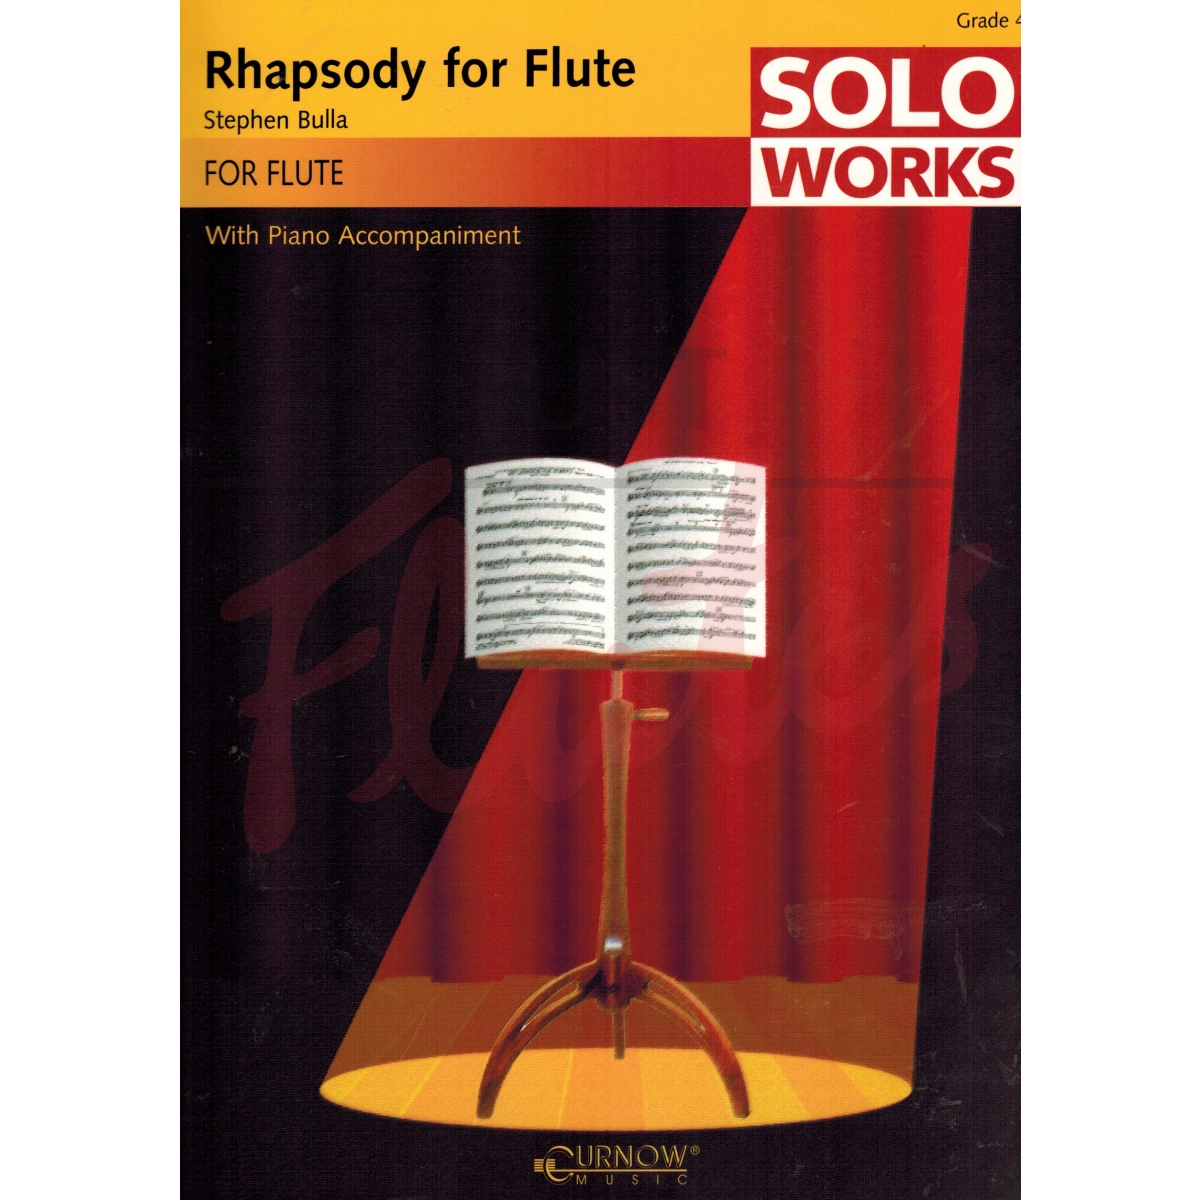 Rhapsody for Flute arranged with Piano Accompaniment